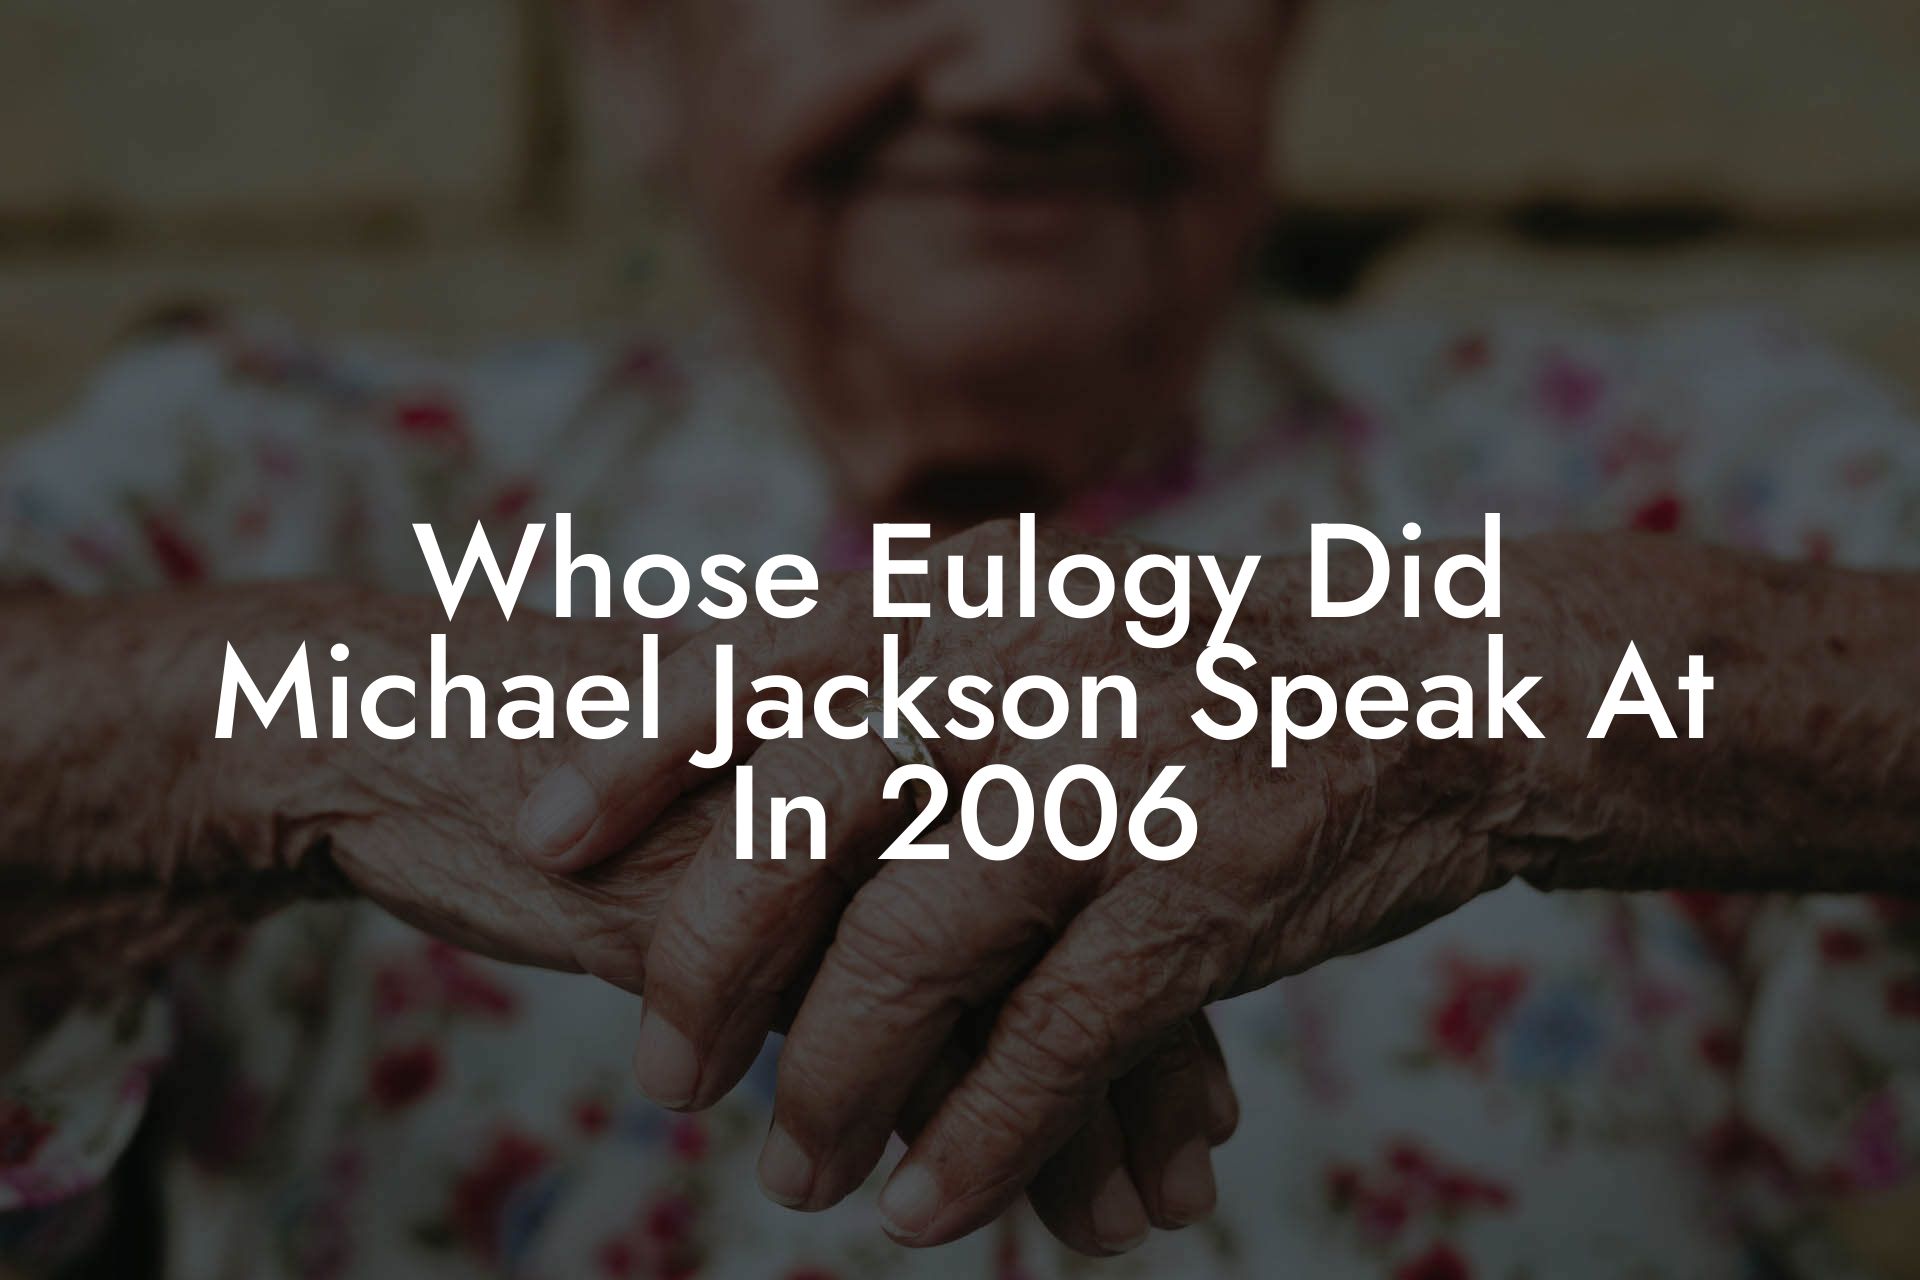 Whose Eulogy Did Michael Jackson Speak At In 2006